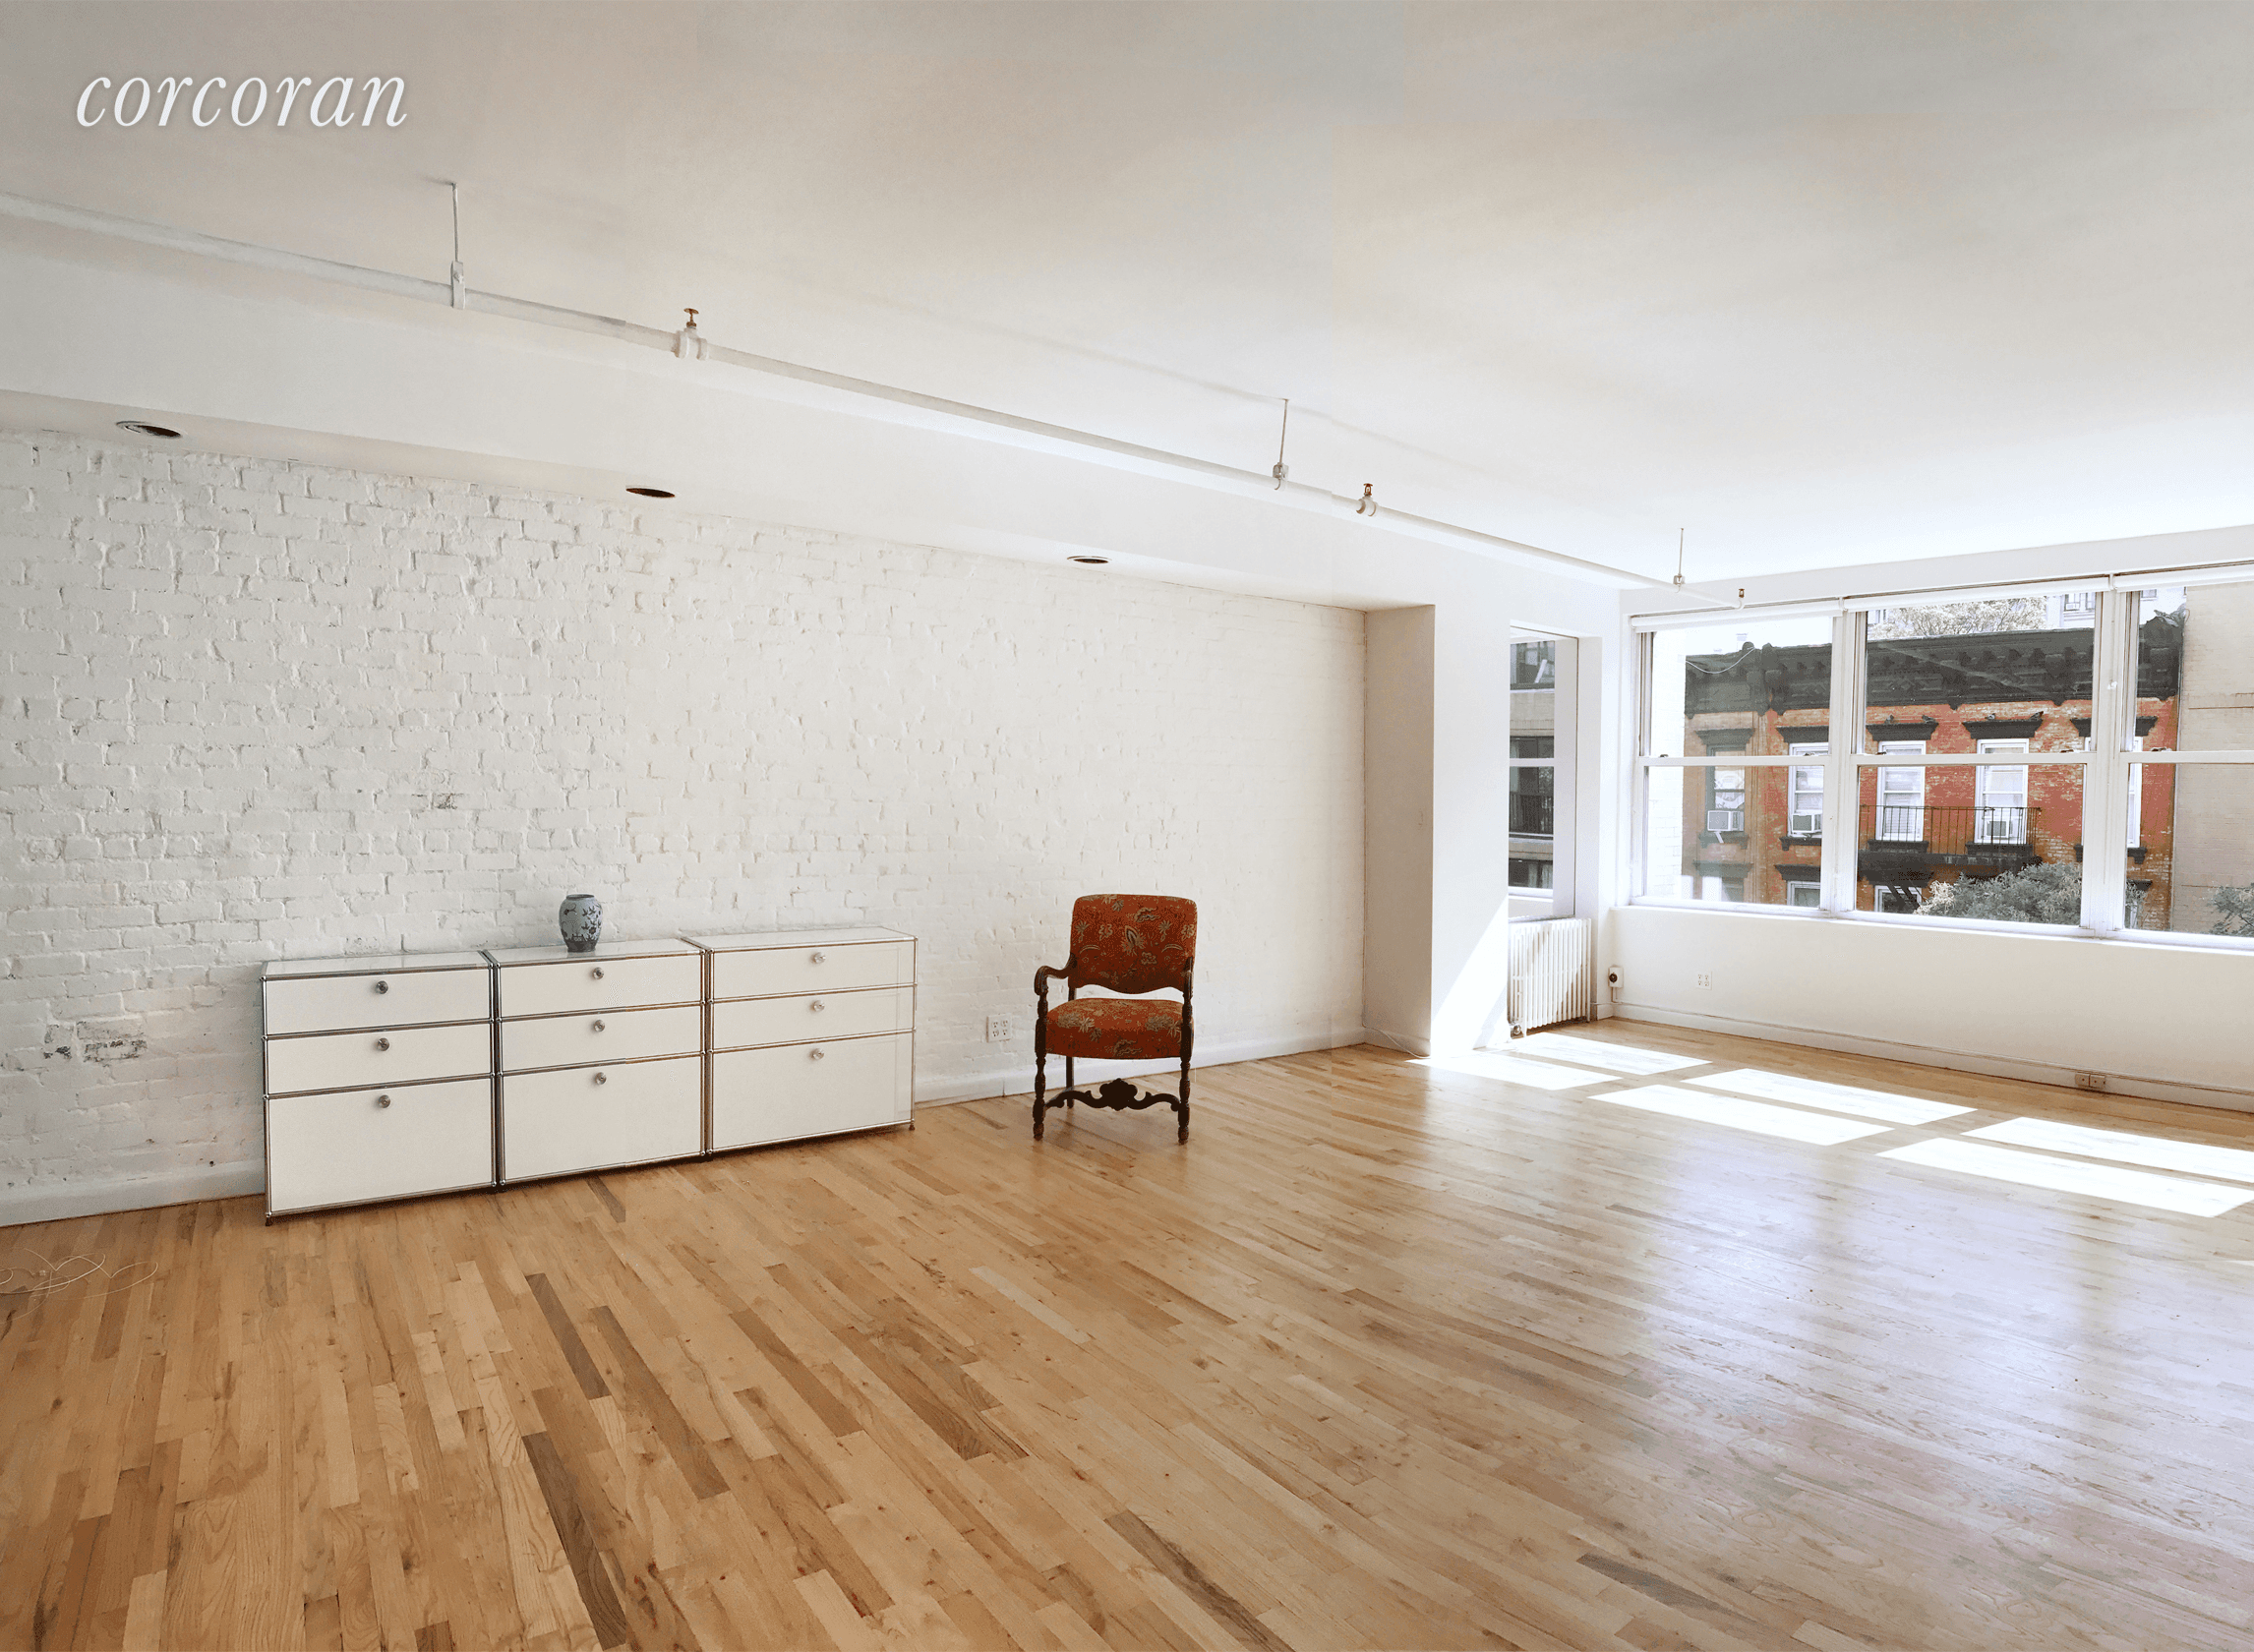 This authentic full floor artist's loft is located in the heart of Greenwich Village and presents an excellent opportunity to create your dream home in one of Manhattan's most vibrant ...